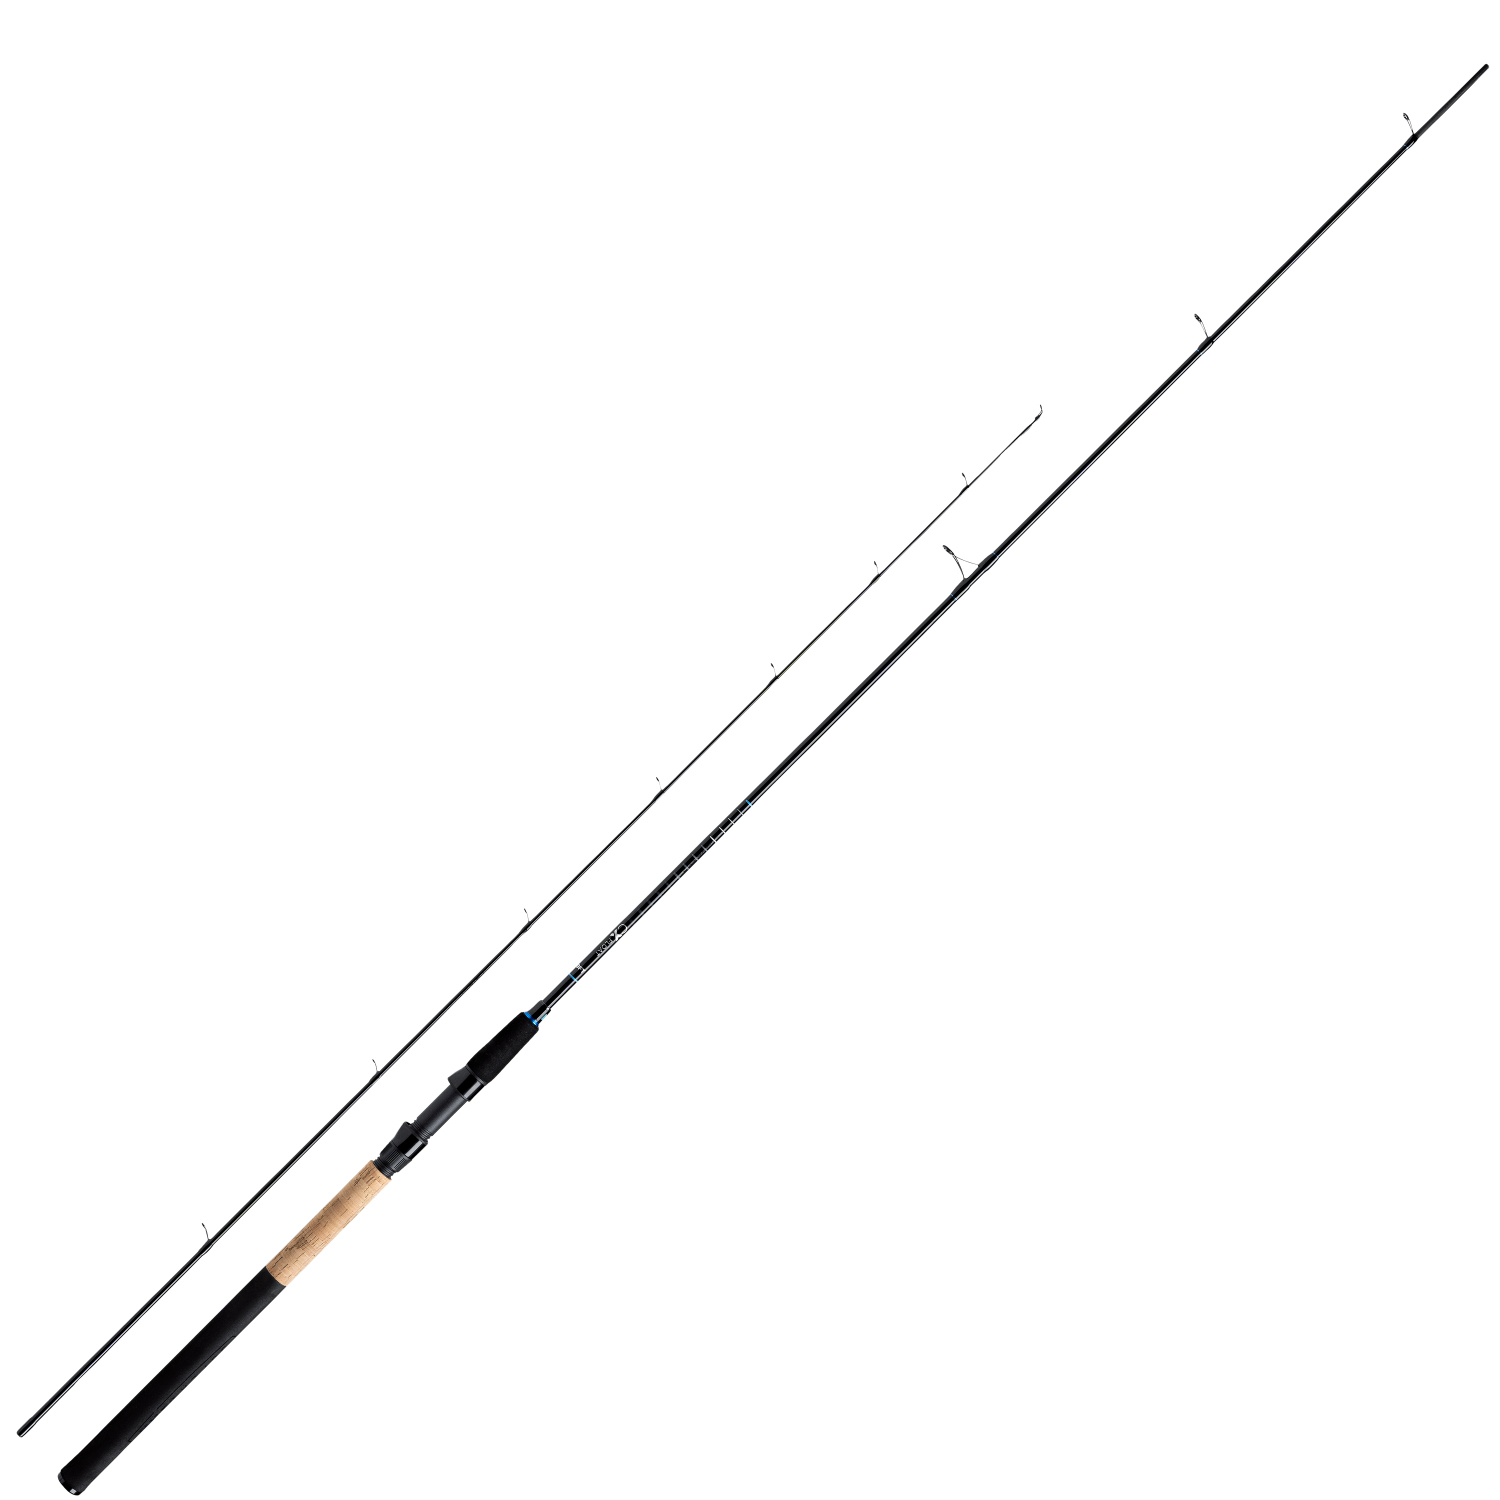 Shakespeare Fishing rod Superteam CX at low prices